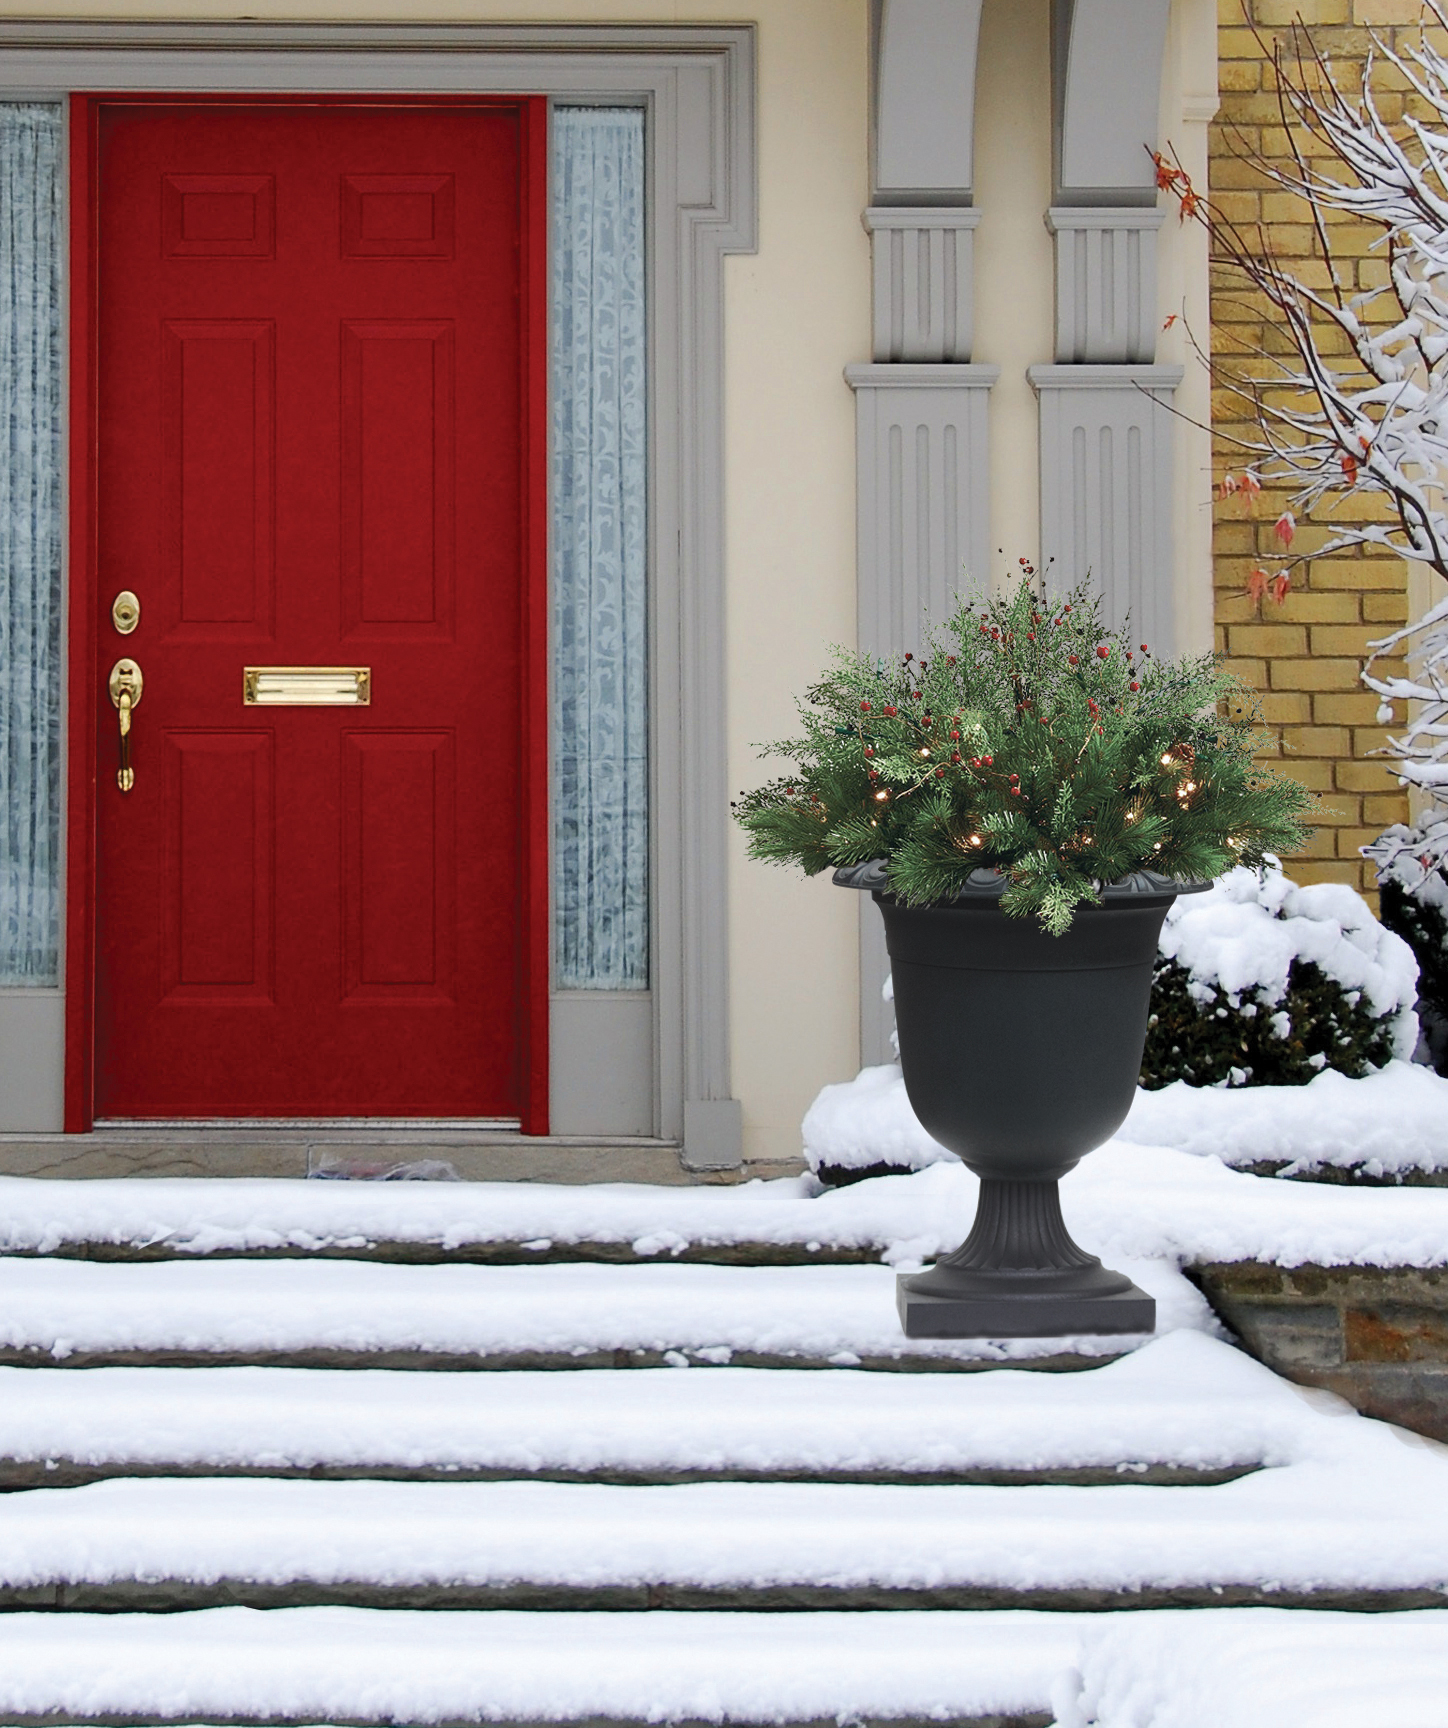 Creating curbside appeal for the holidays